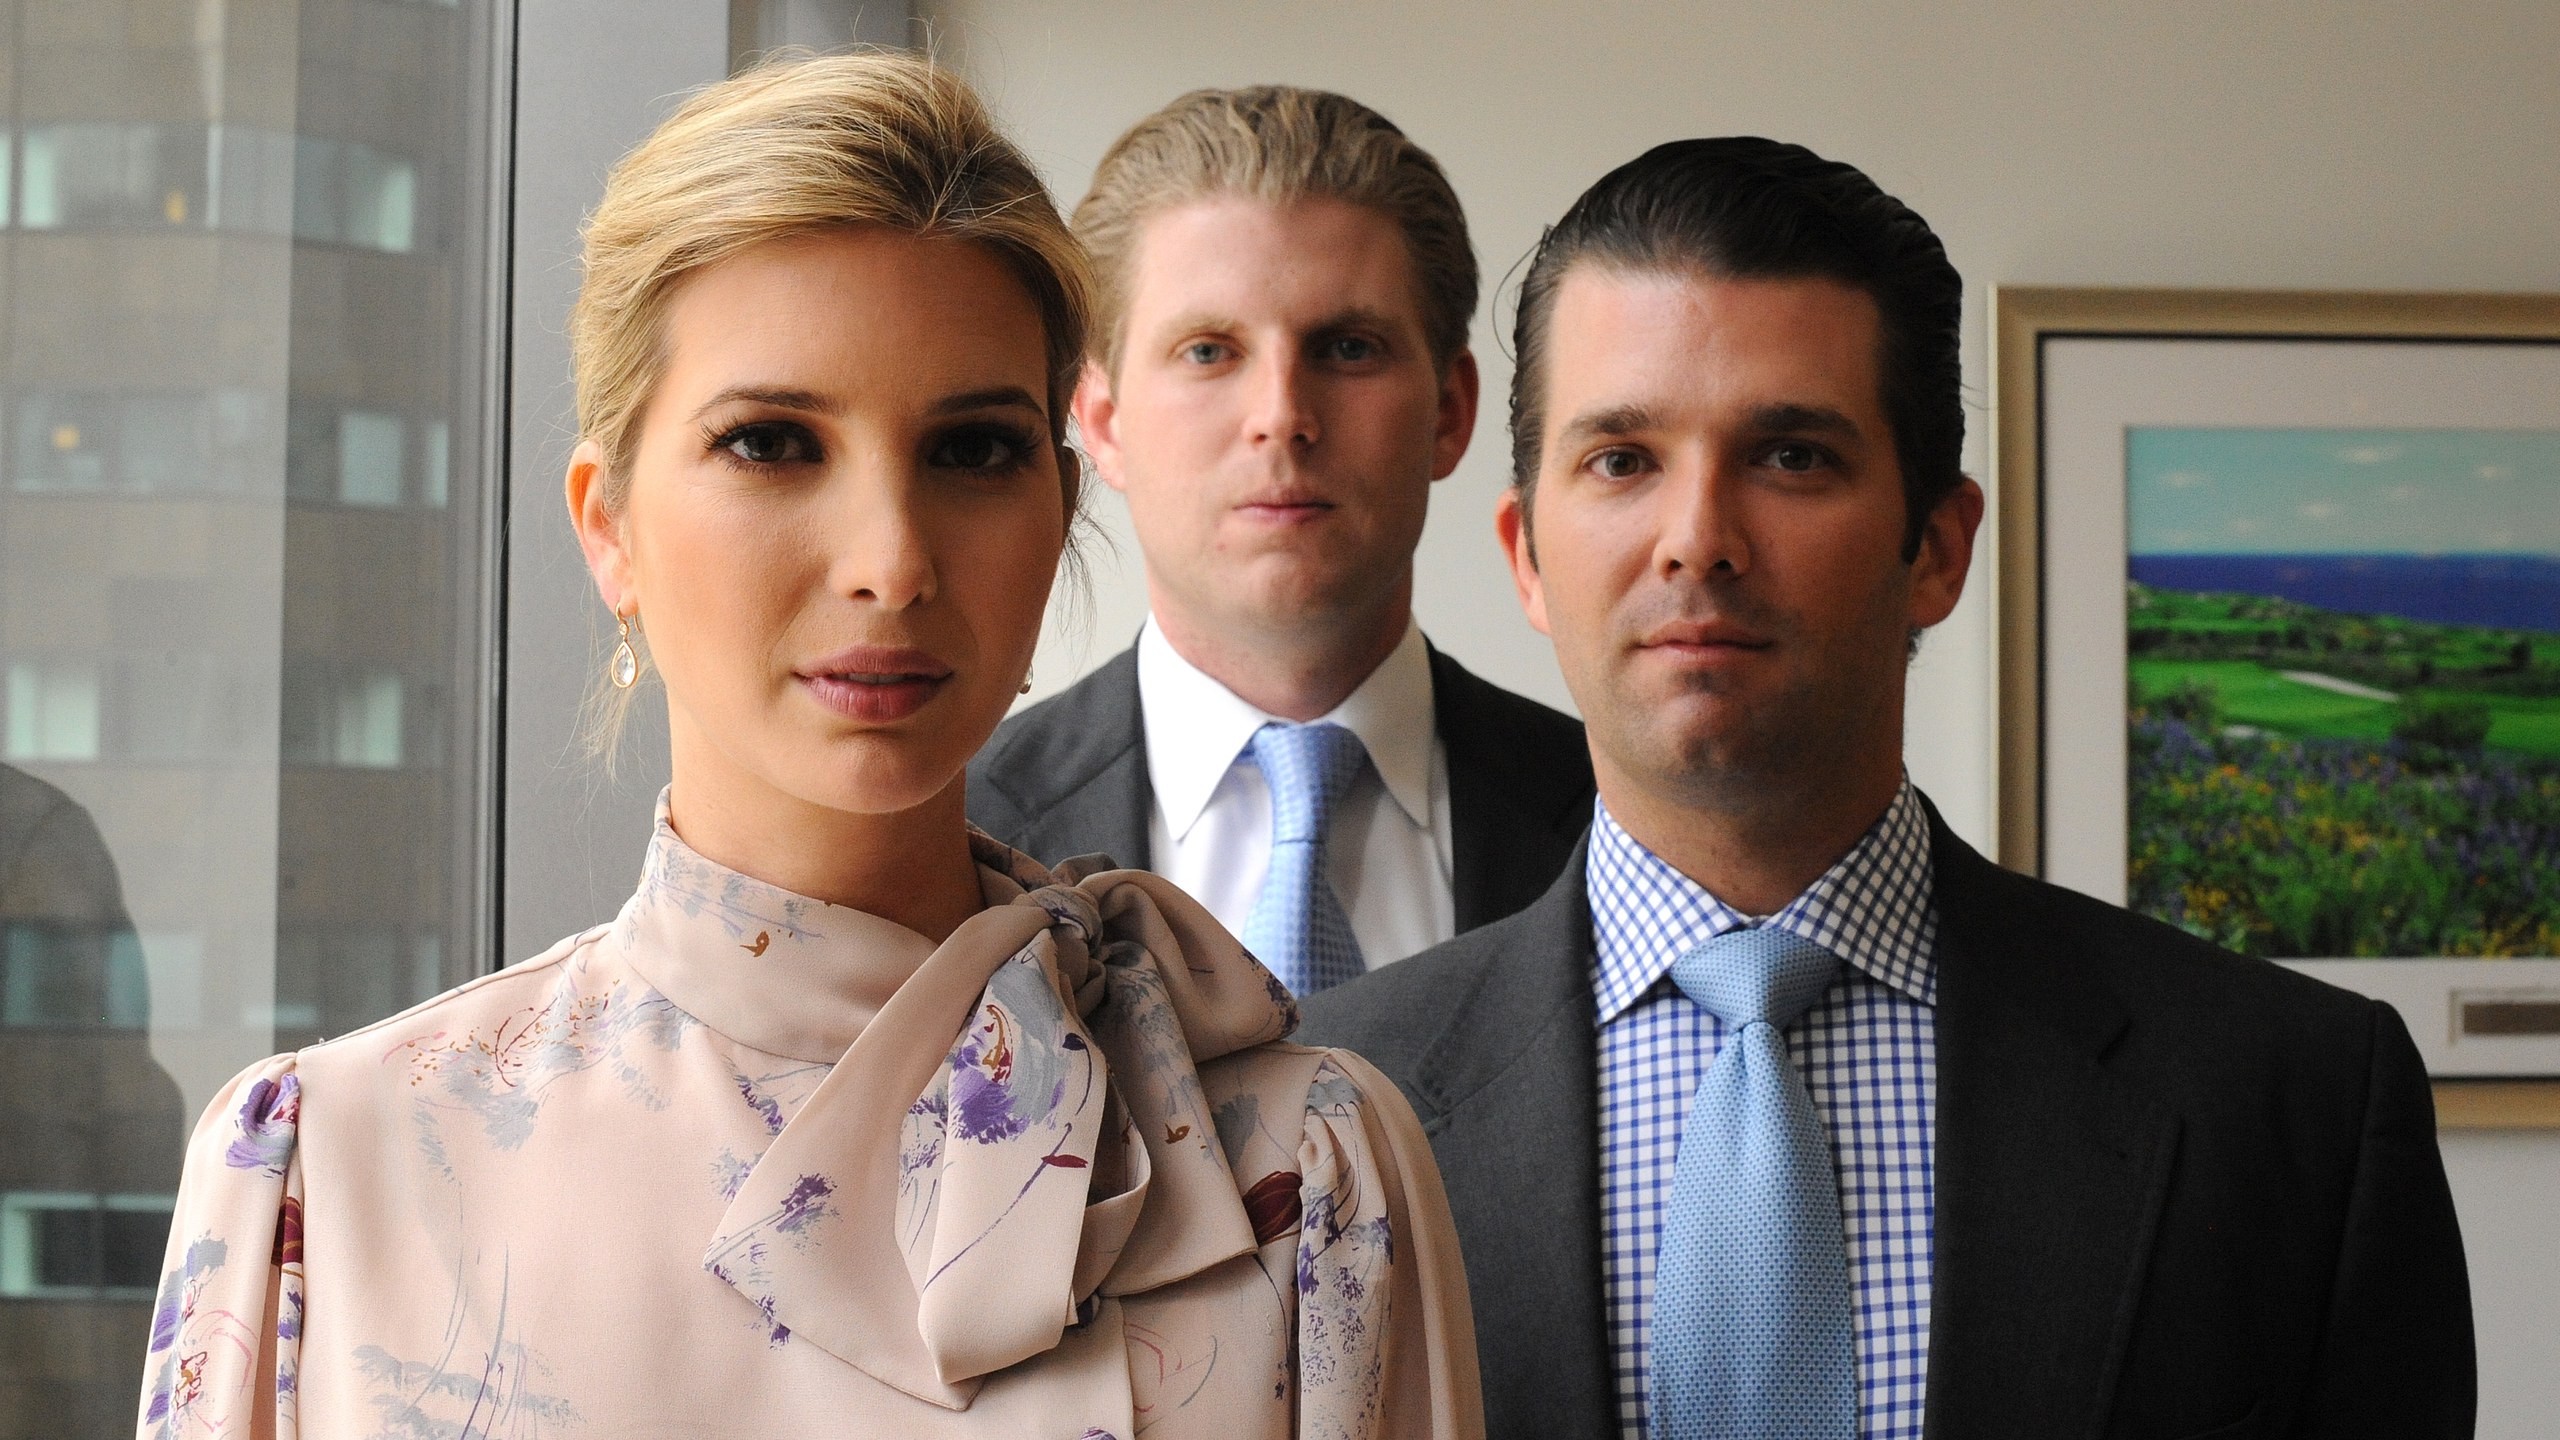 Trump-Kids-and-Their-Sketchy-Business-Deals-gq-october-101019